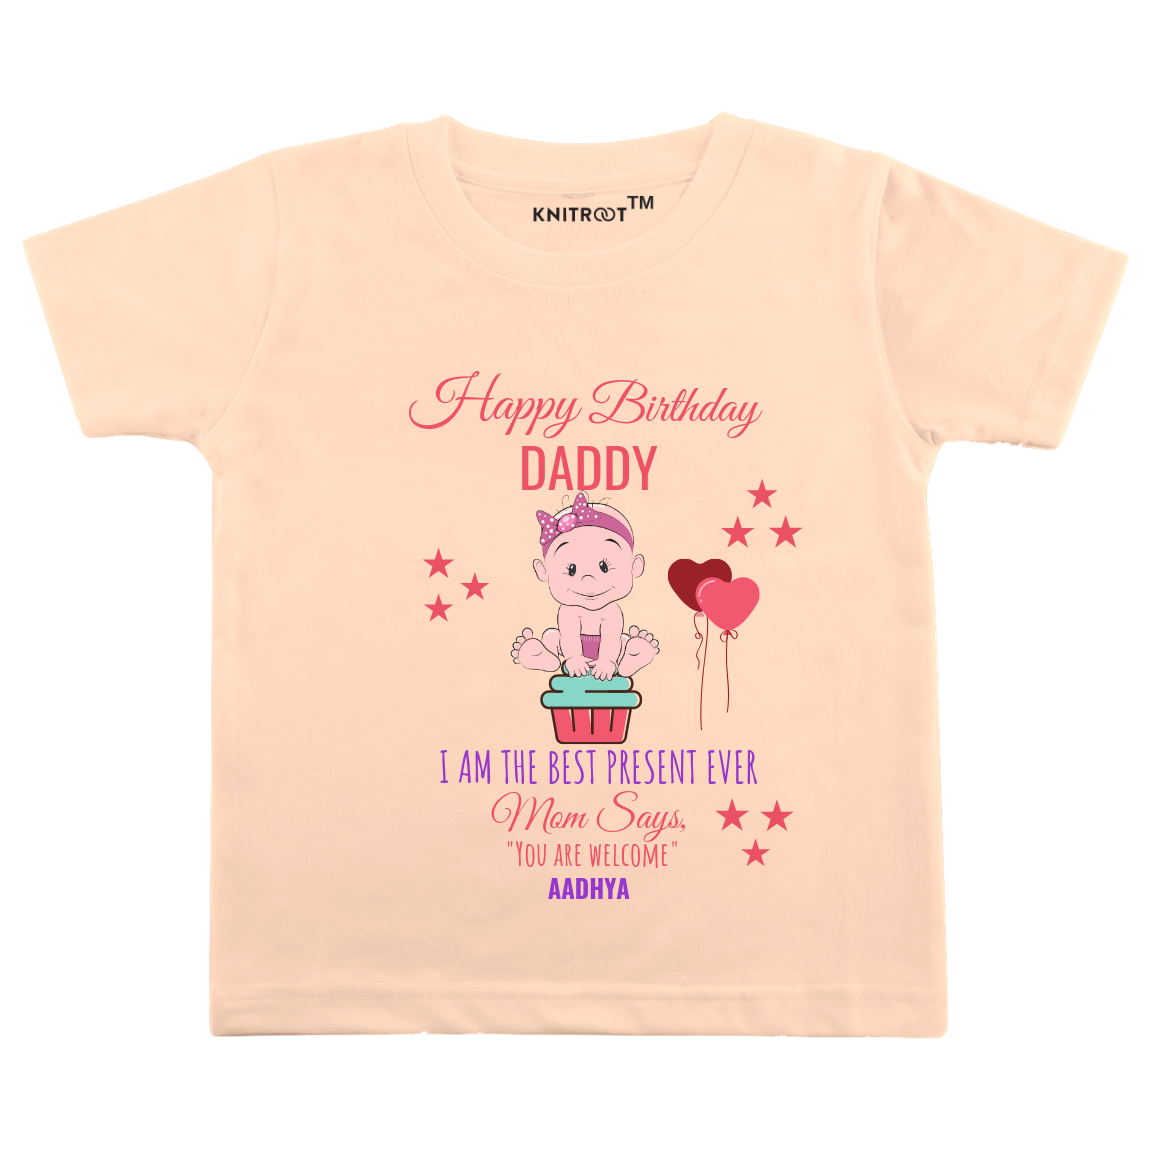 Happy Birthday Dad with Small Baby Tee